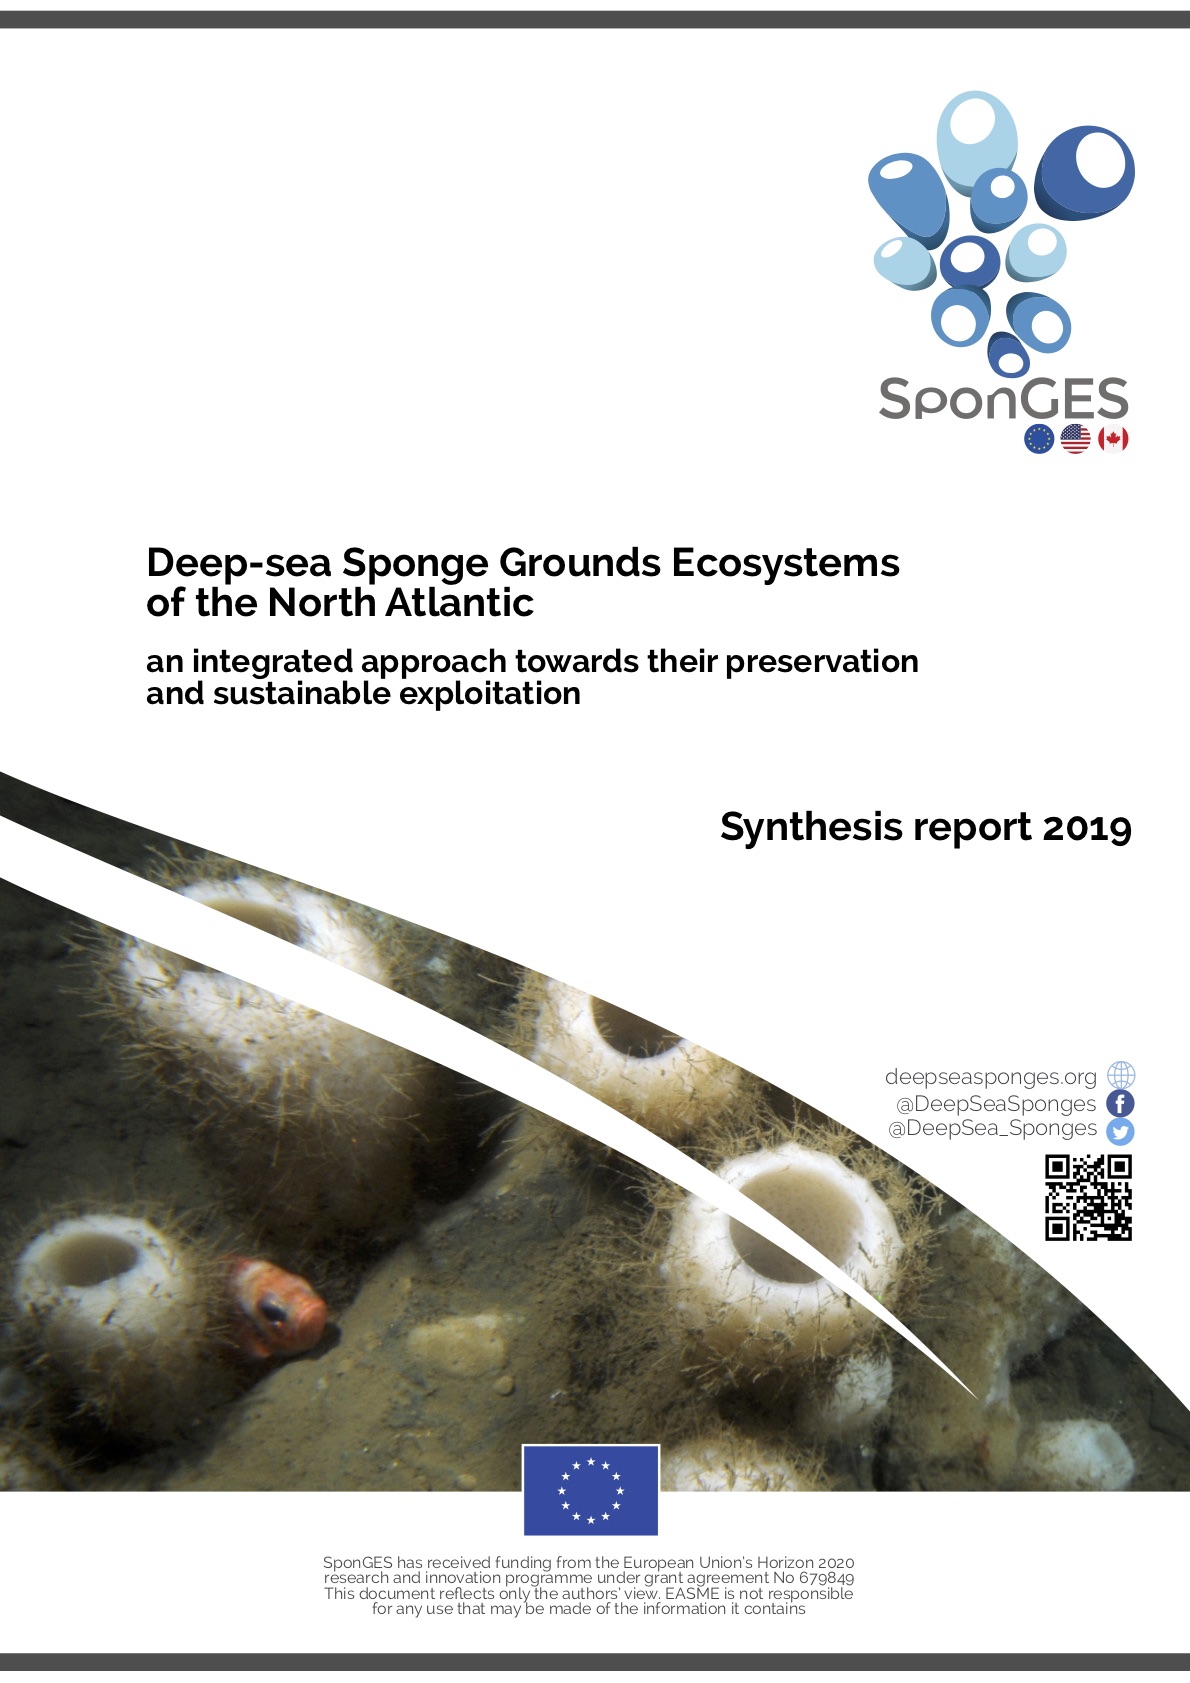 SponGES synthesis report 2019